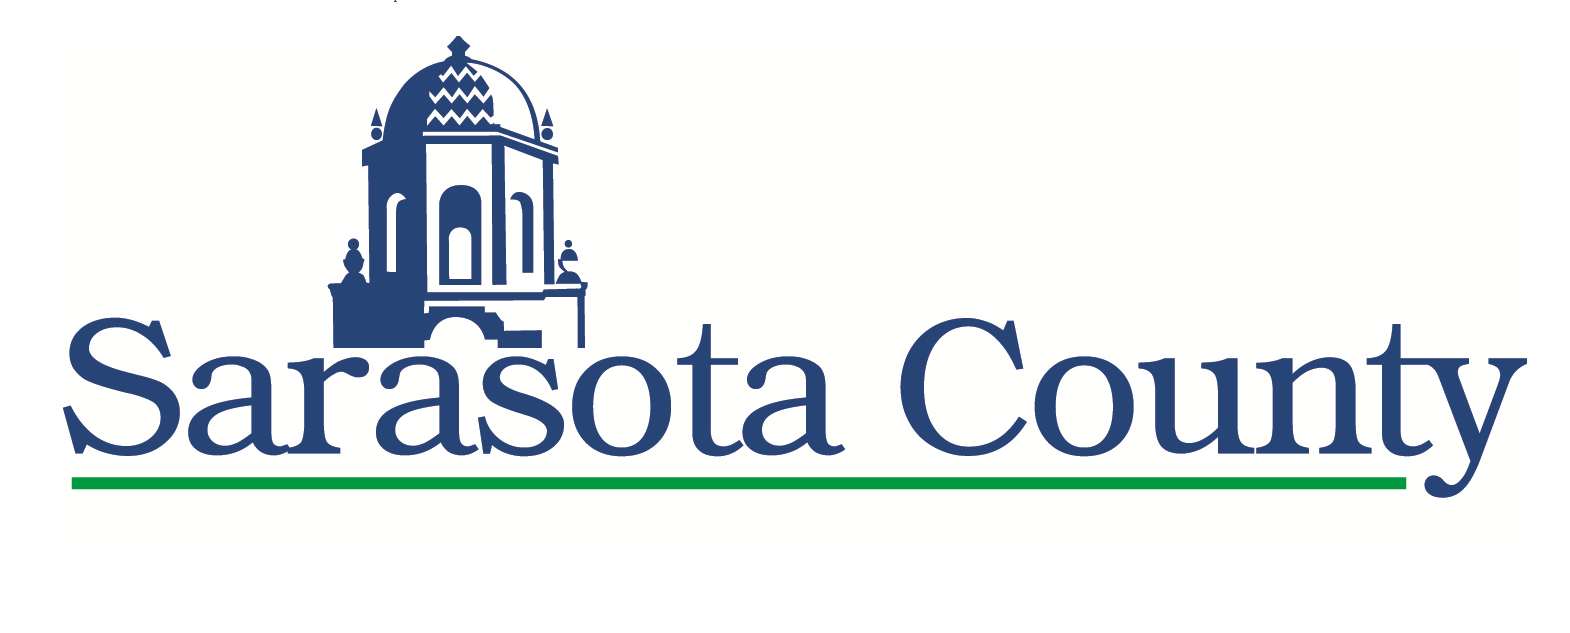 Board of County Commissioners logo